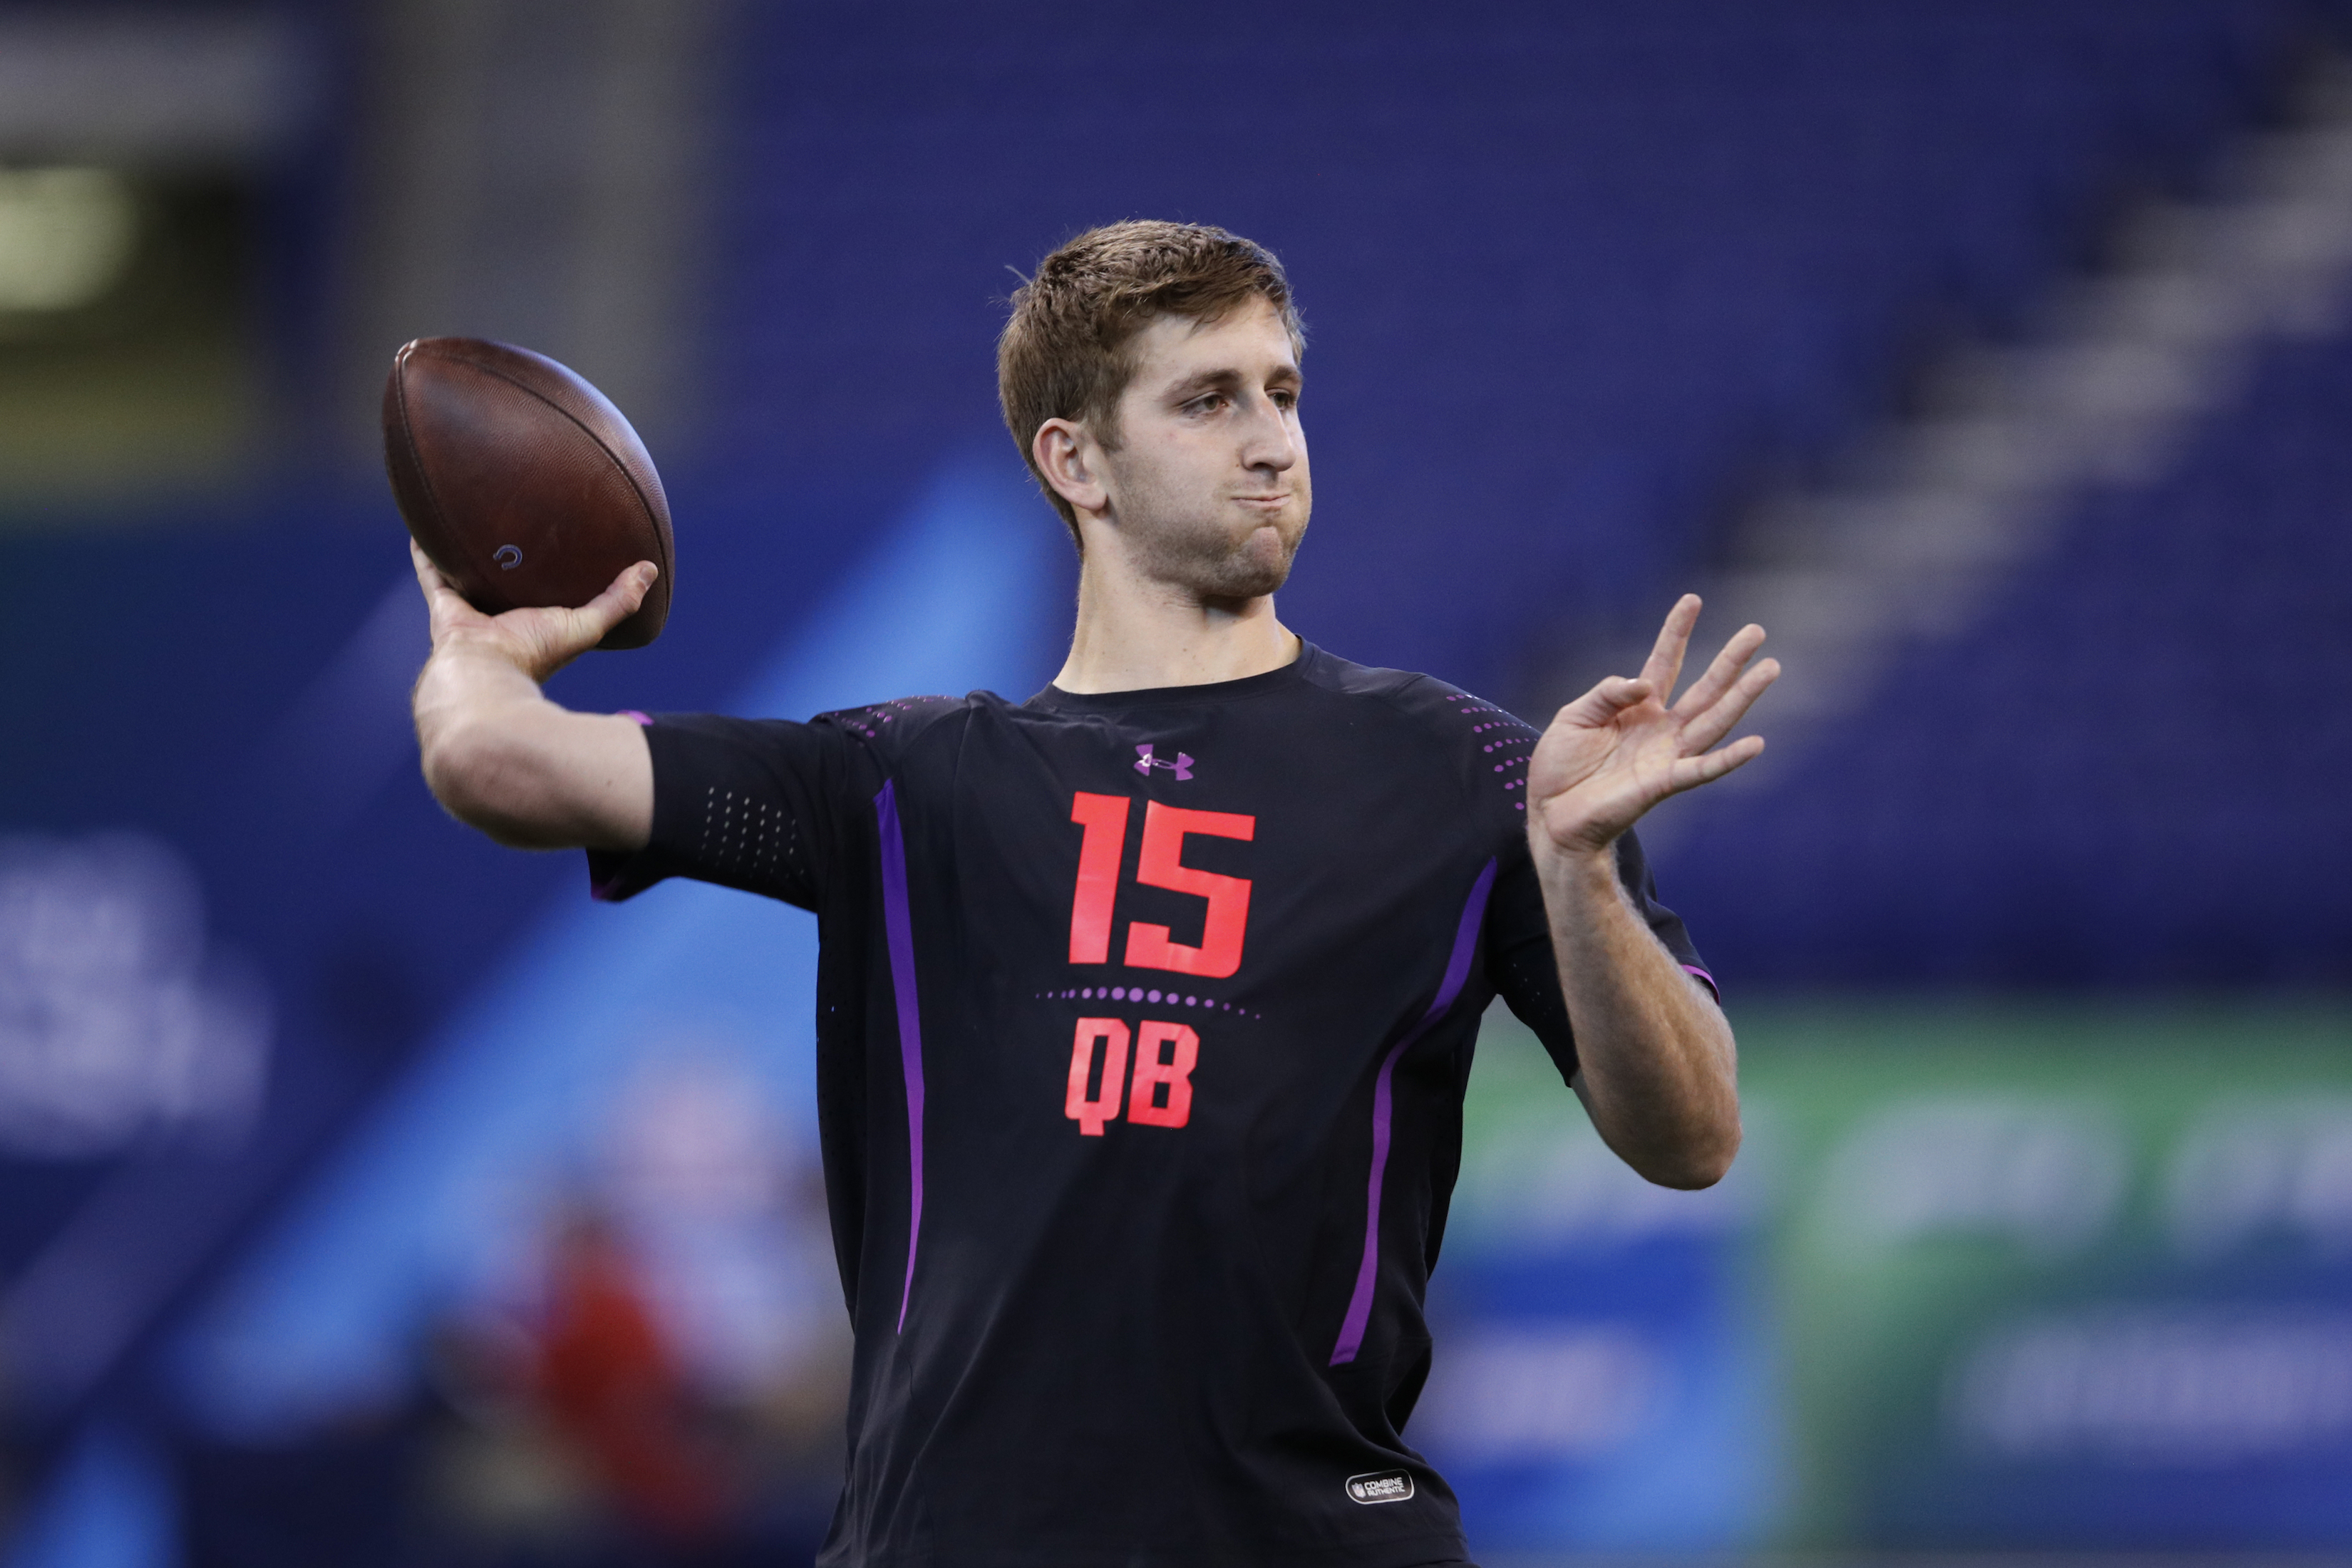 UCLA quarterback Josh Rosen throws during the NFL Combine at Lucas Oil Stadium on March 3, 2018 in Indianapolis, Indiana. (Photo by Joe Robbins/Getty Images)